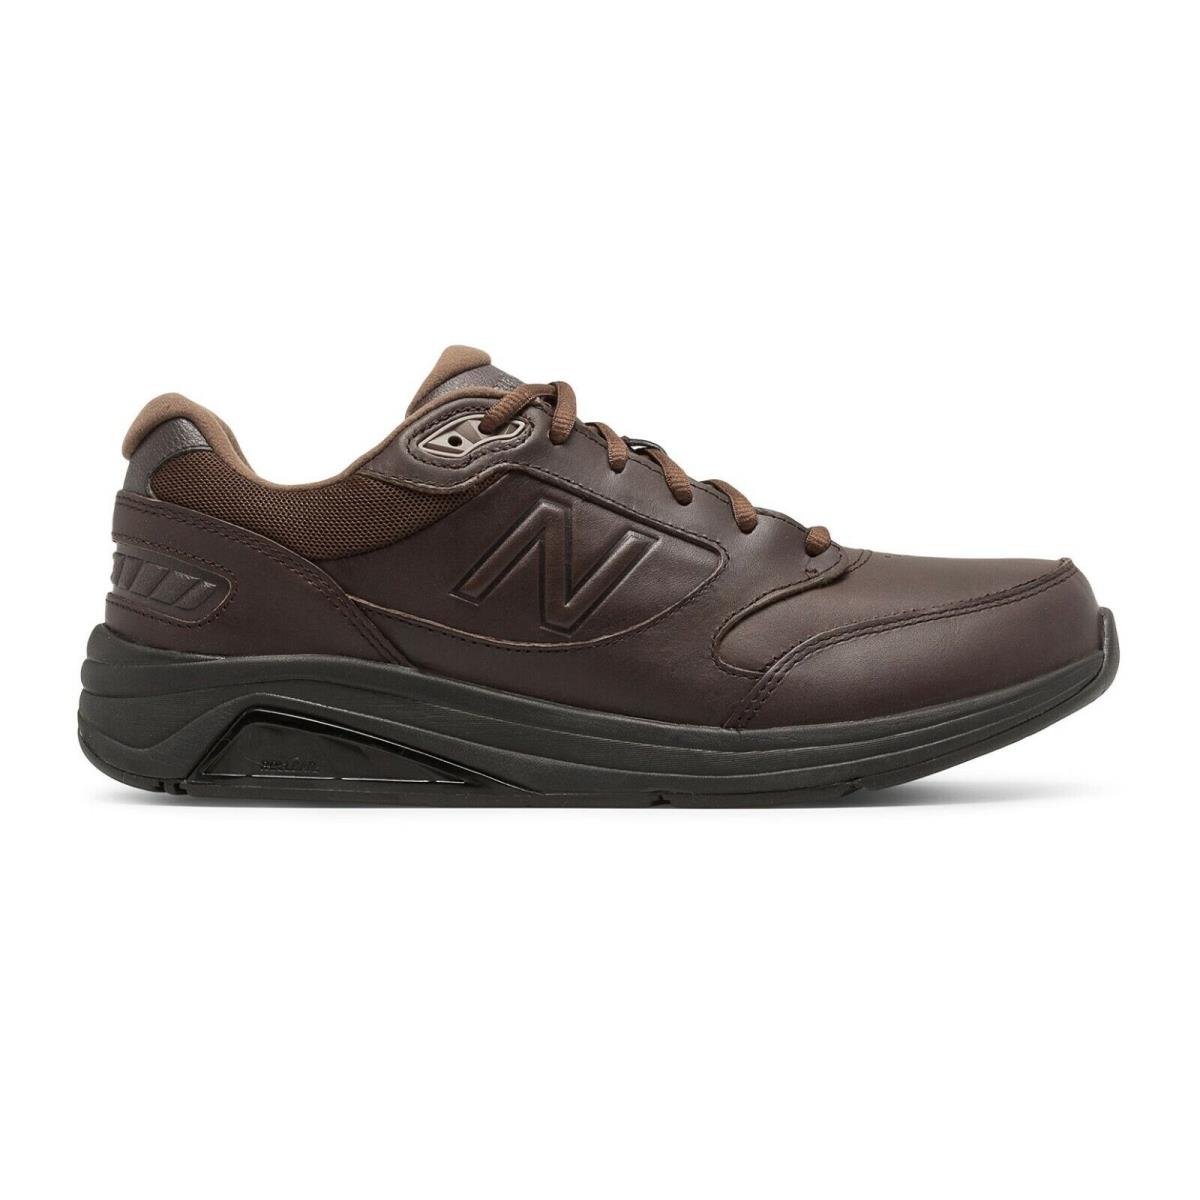 New Balance Mens Leather MW928BR2 Brown Walking Shoes US 9 B Eur 42.5 Narrow